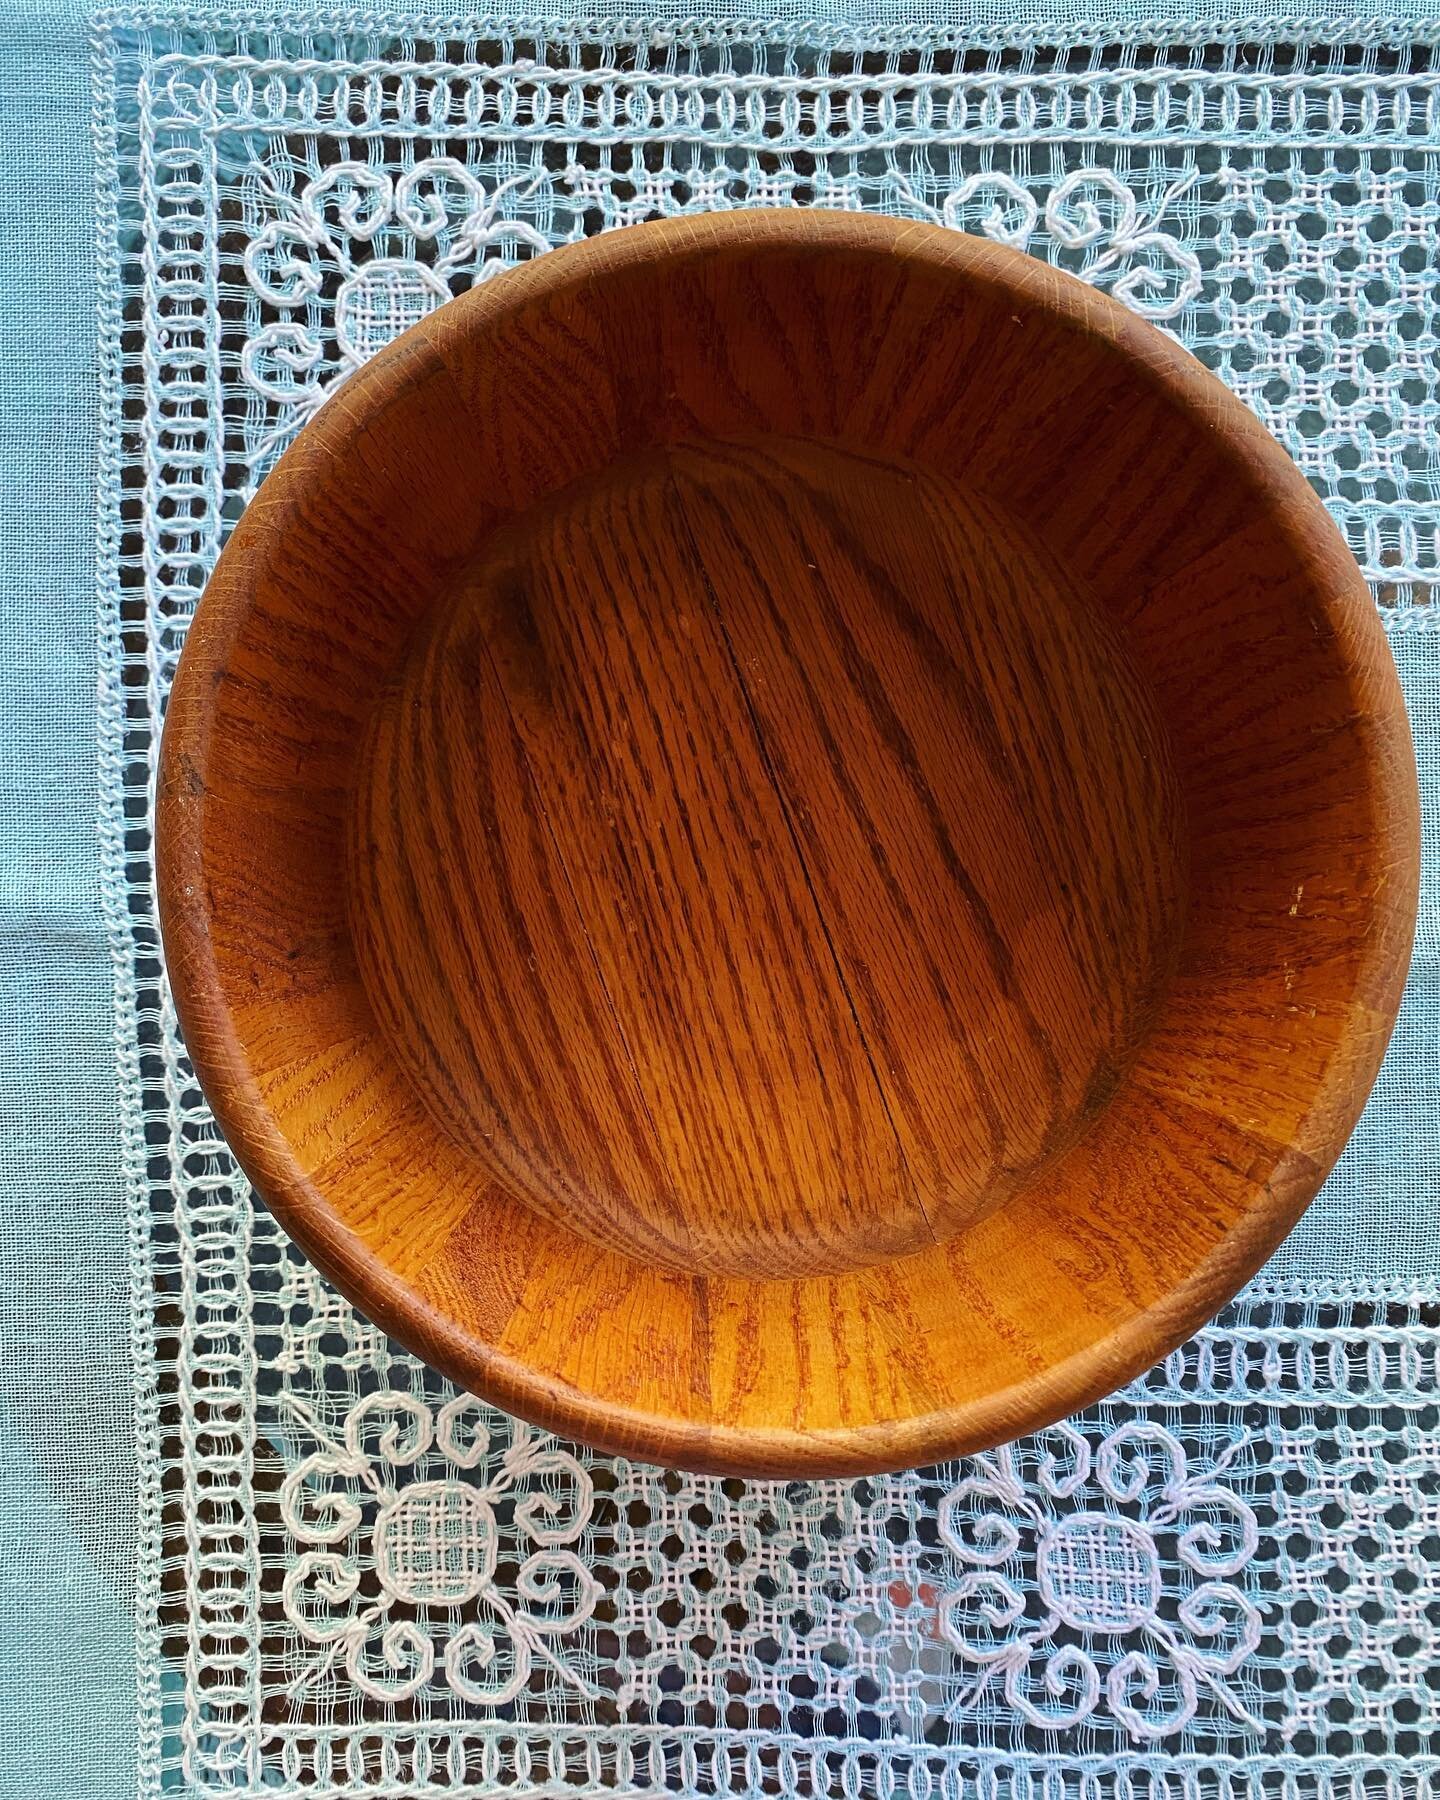 ✨FOR SALE:✨
Deep wood bowl with gorgeous wood grain. I think this is a walnut wood, but I&rsquo;m not a wood expert. There&rsquo;s a small crack at the bottom of the bowl inside if you zoom in on the picture. This would be a great catch all bowl in y